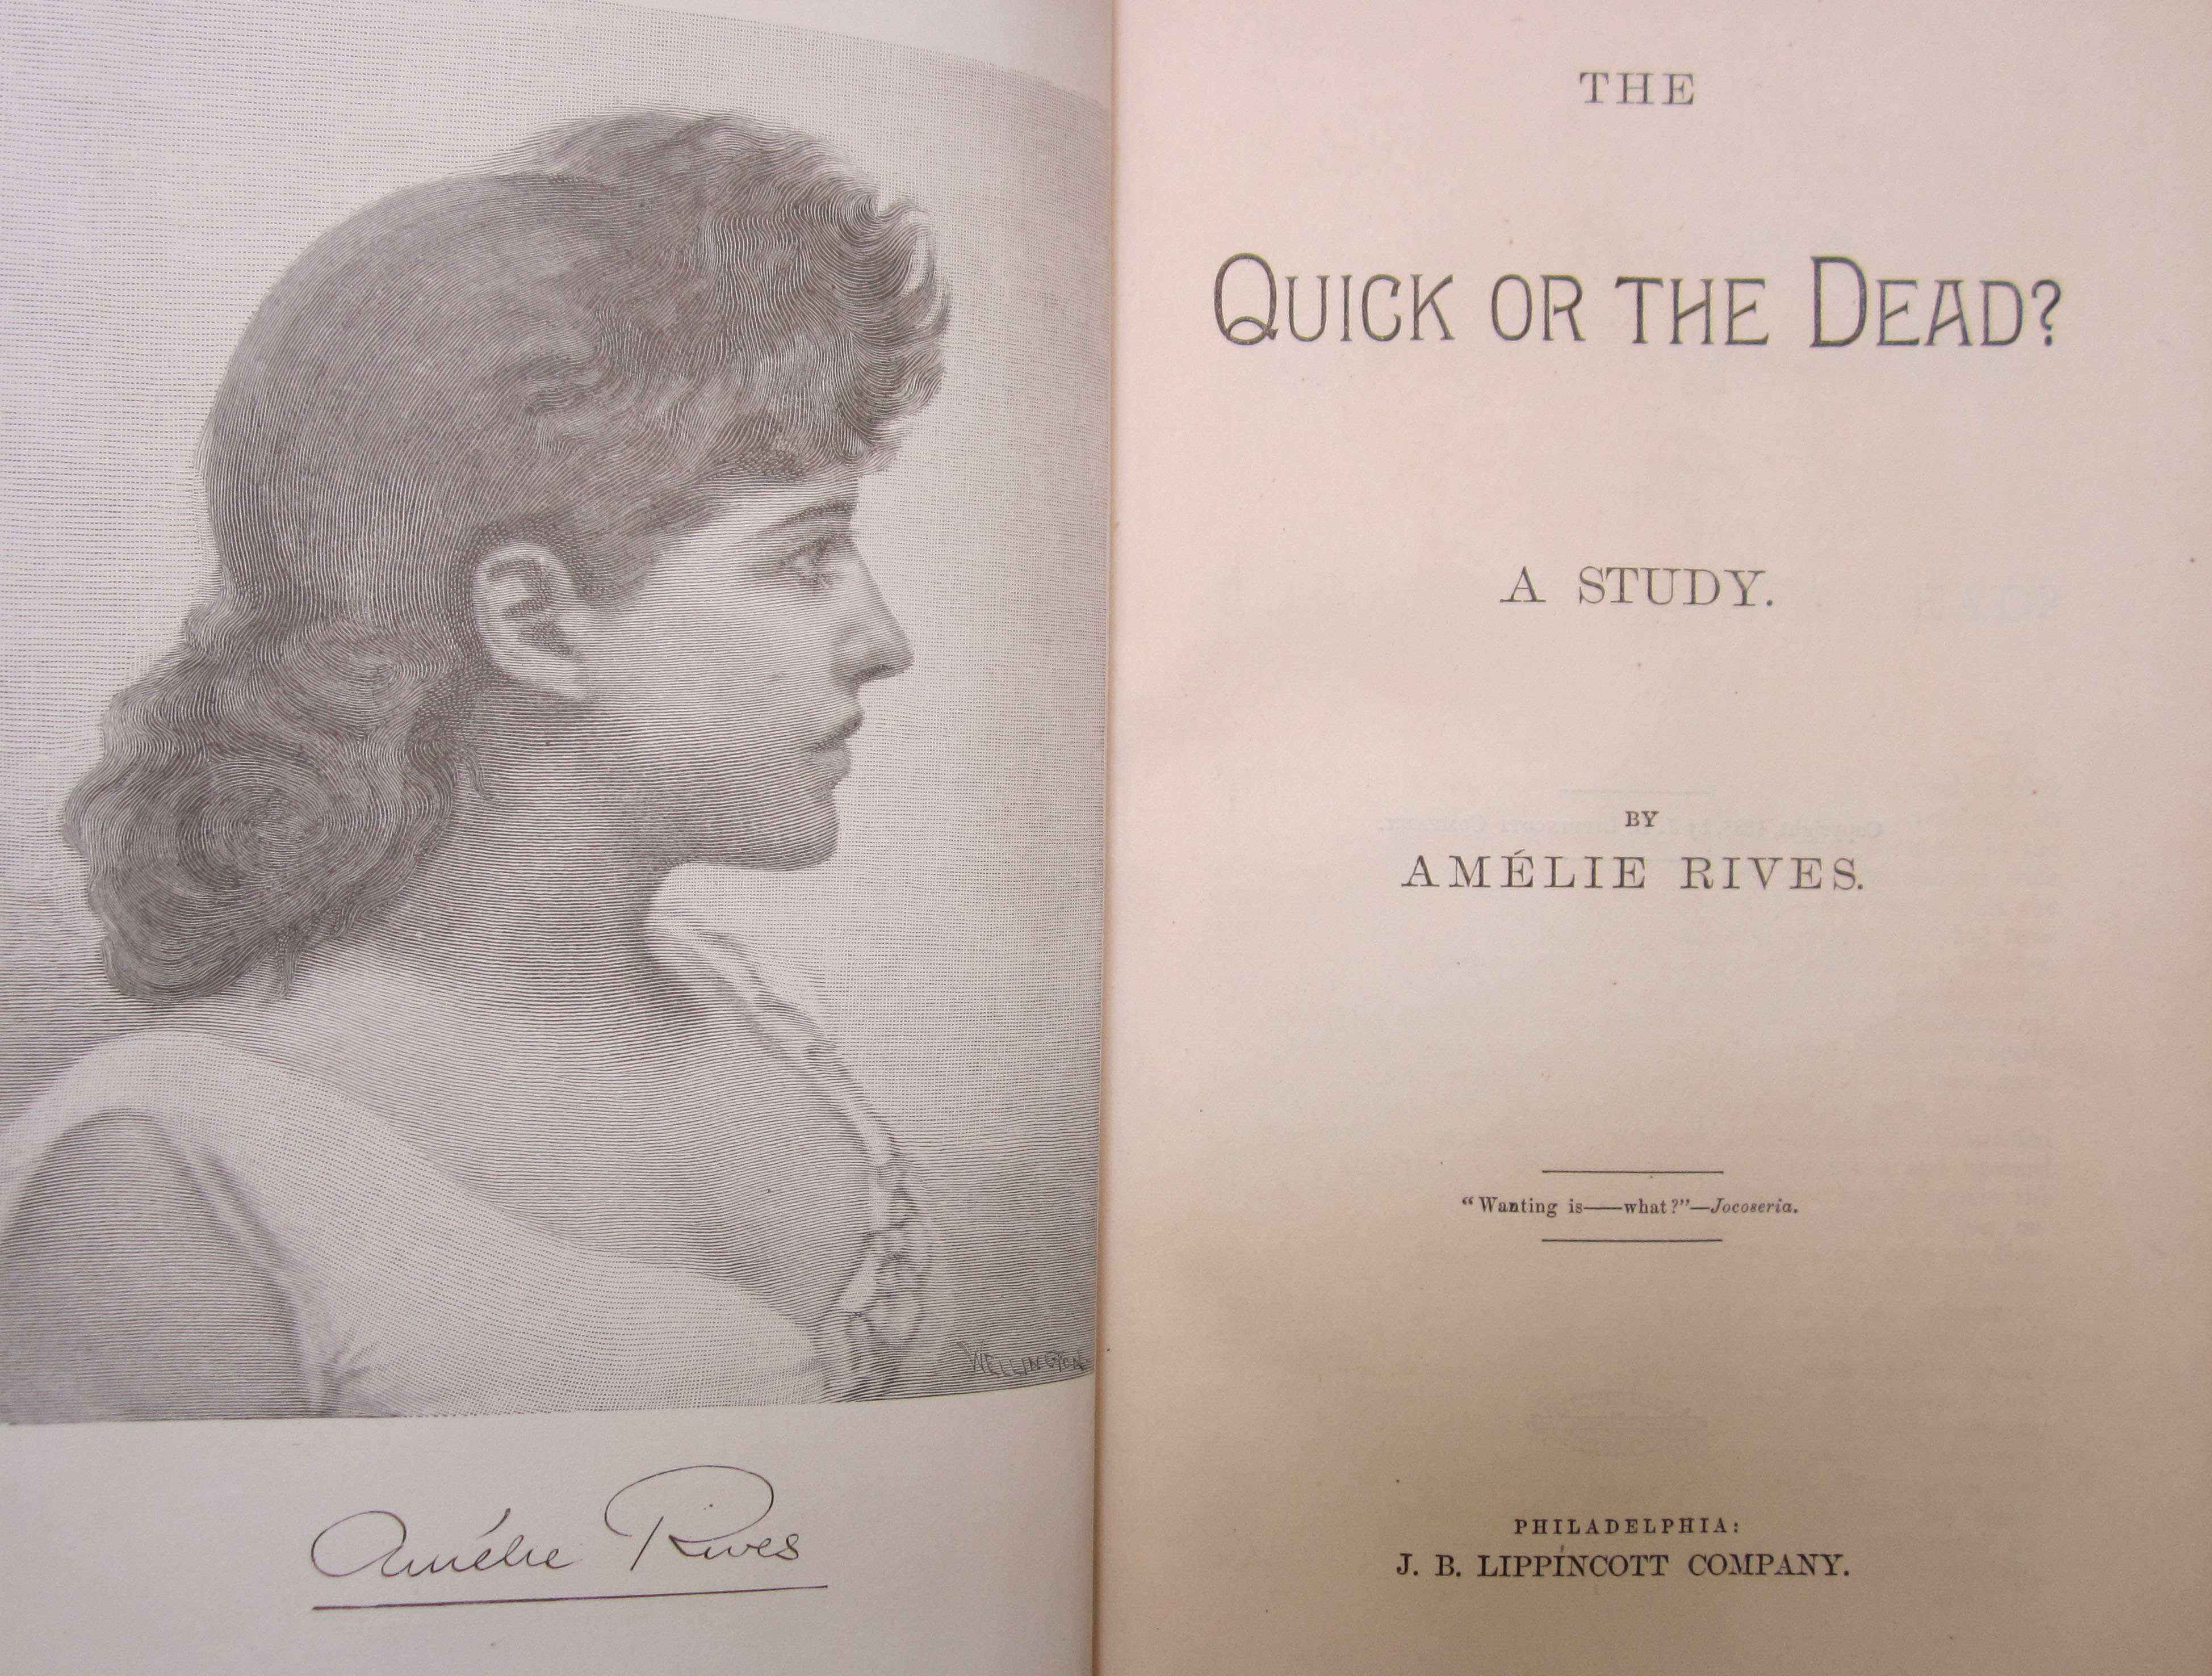 Frontispiece and title page of The Quick or the Dead by Amelie Rives, from Lippincott's Monthly Magazine, April 1888. (Taylor 1888 .T76 Q8. Taylor Collection of American Bestsellers. Photograph by Donna Stapley)